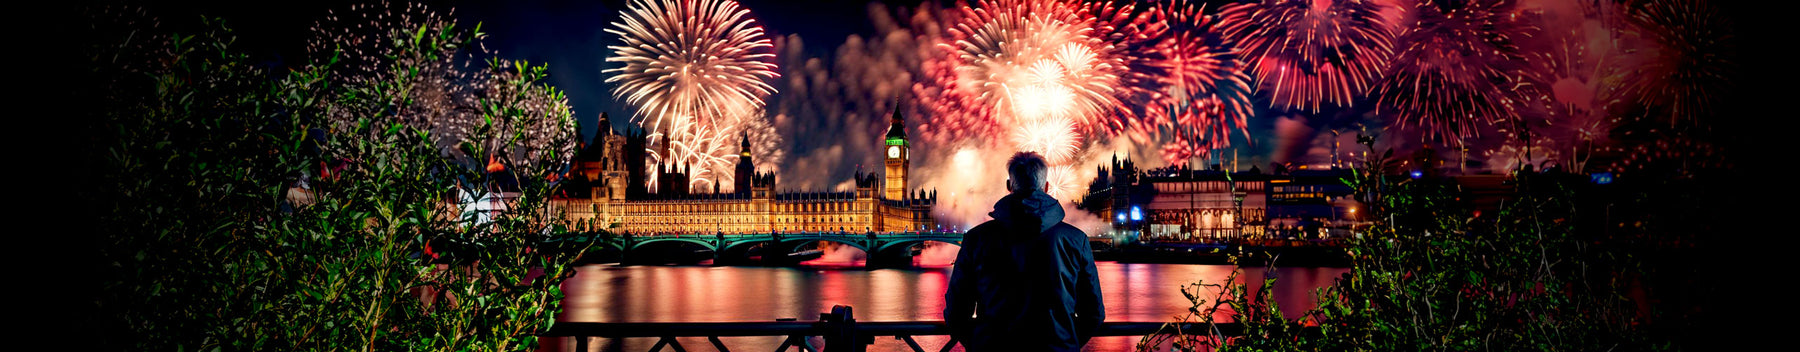 Where to Watch London's New Years Eve Fireworks Display for Free